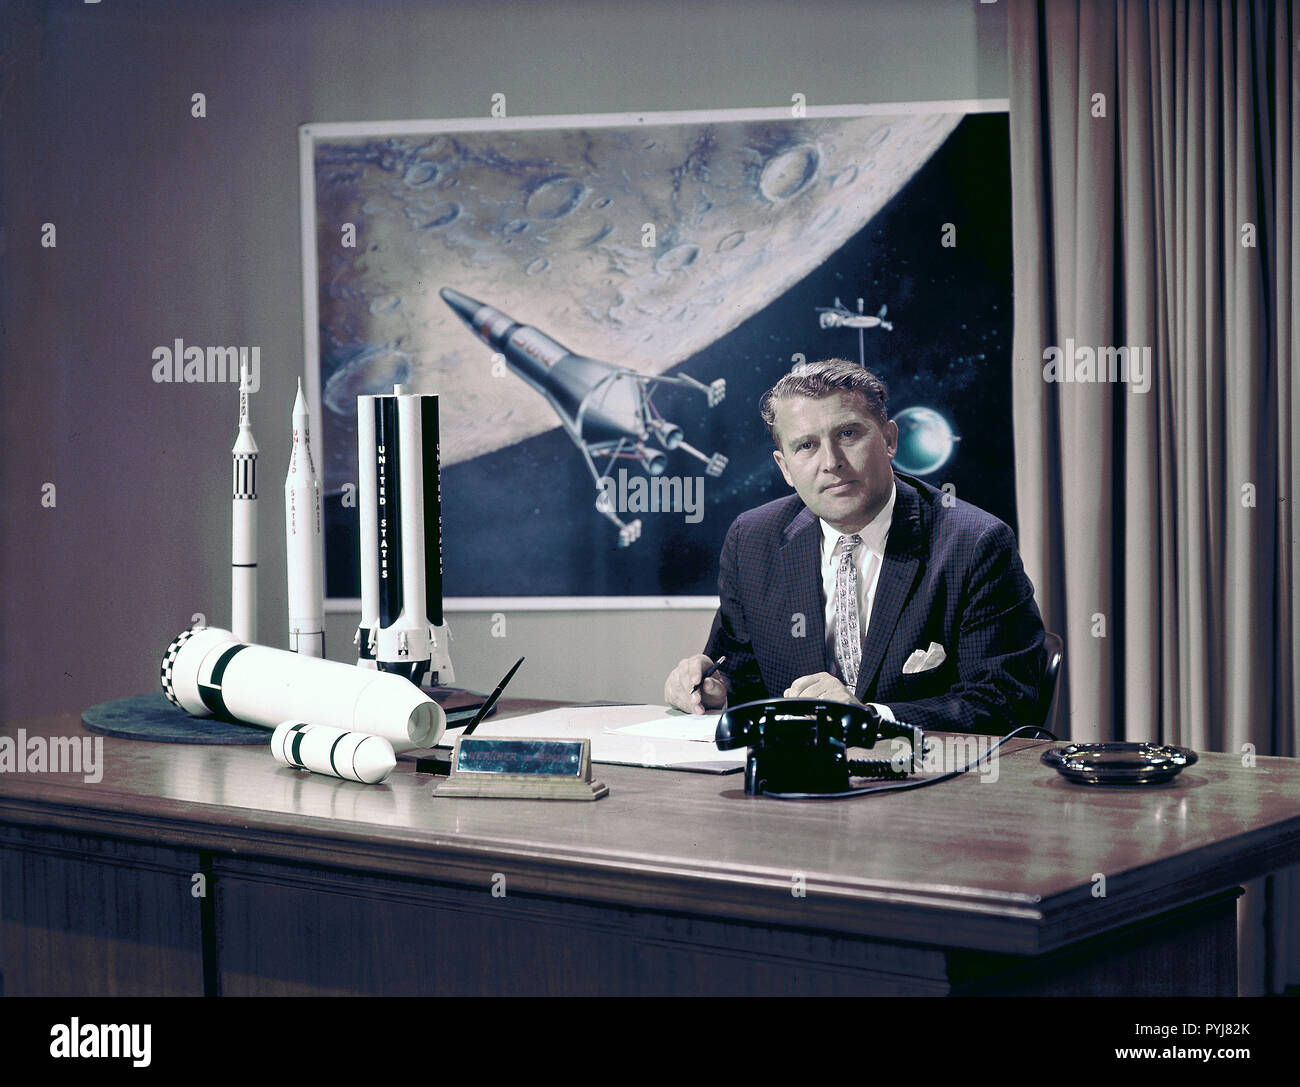 Photo of Marshall Space Flight Center (MSFC) Director Dr. Wernher von Braun at his desk with moon lander in background and rocket models on his desk. Stock Photo